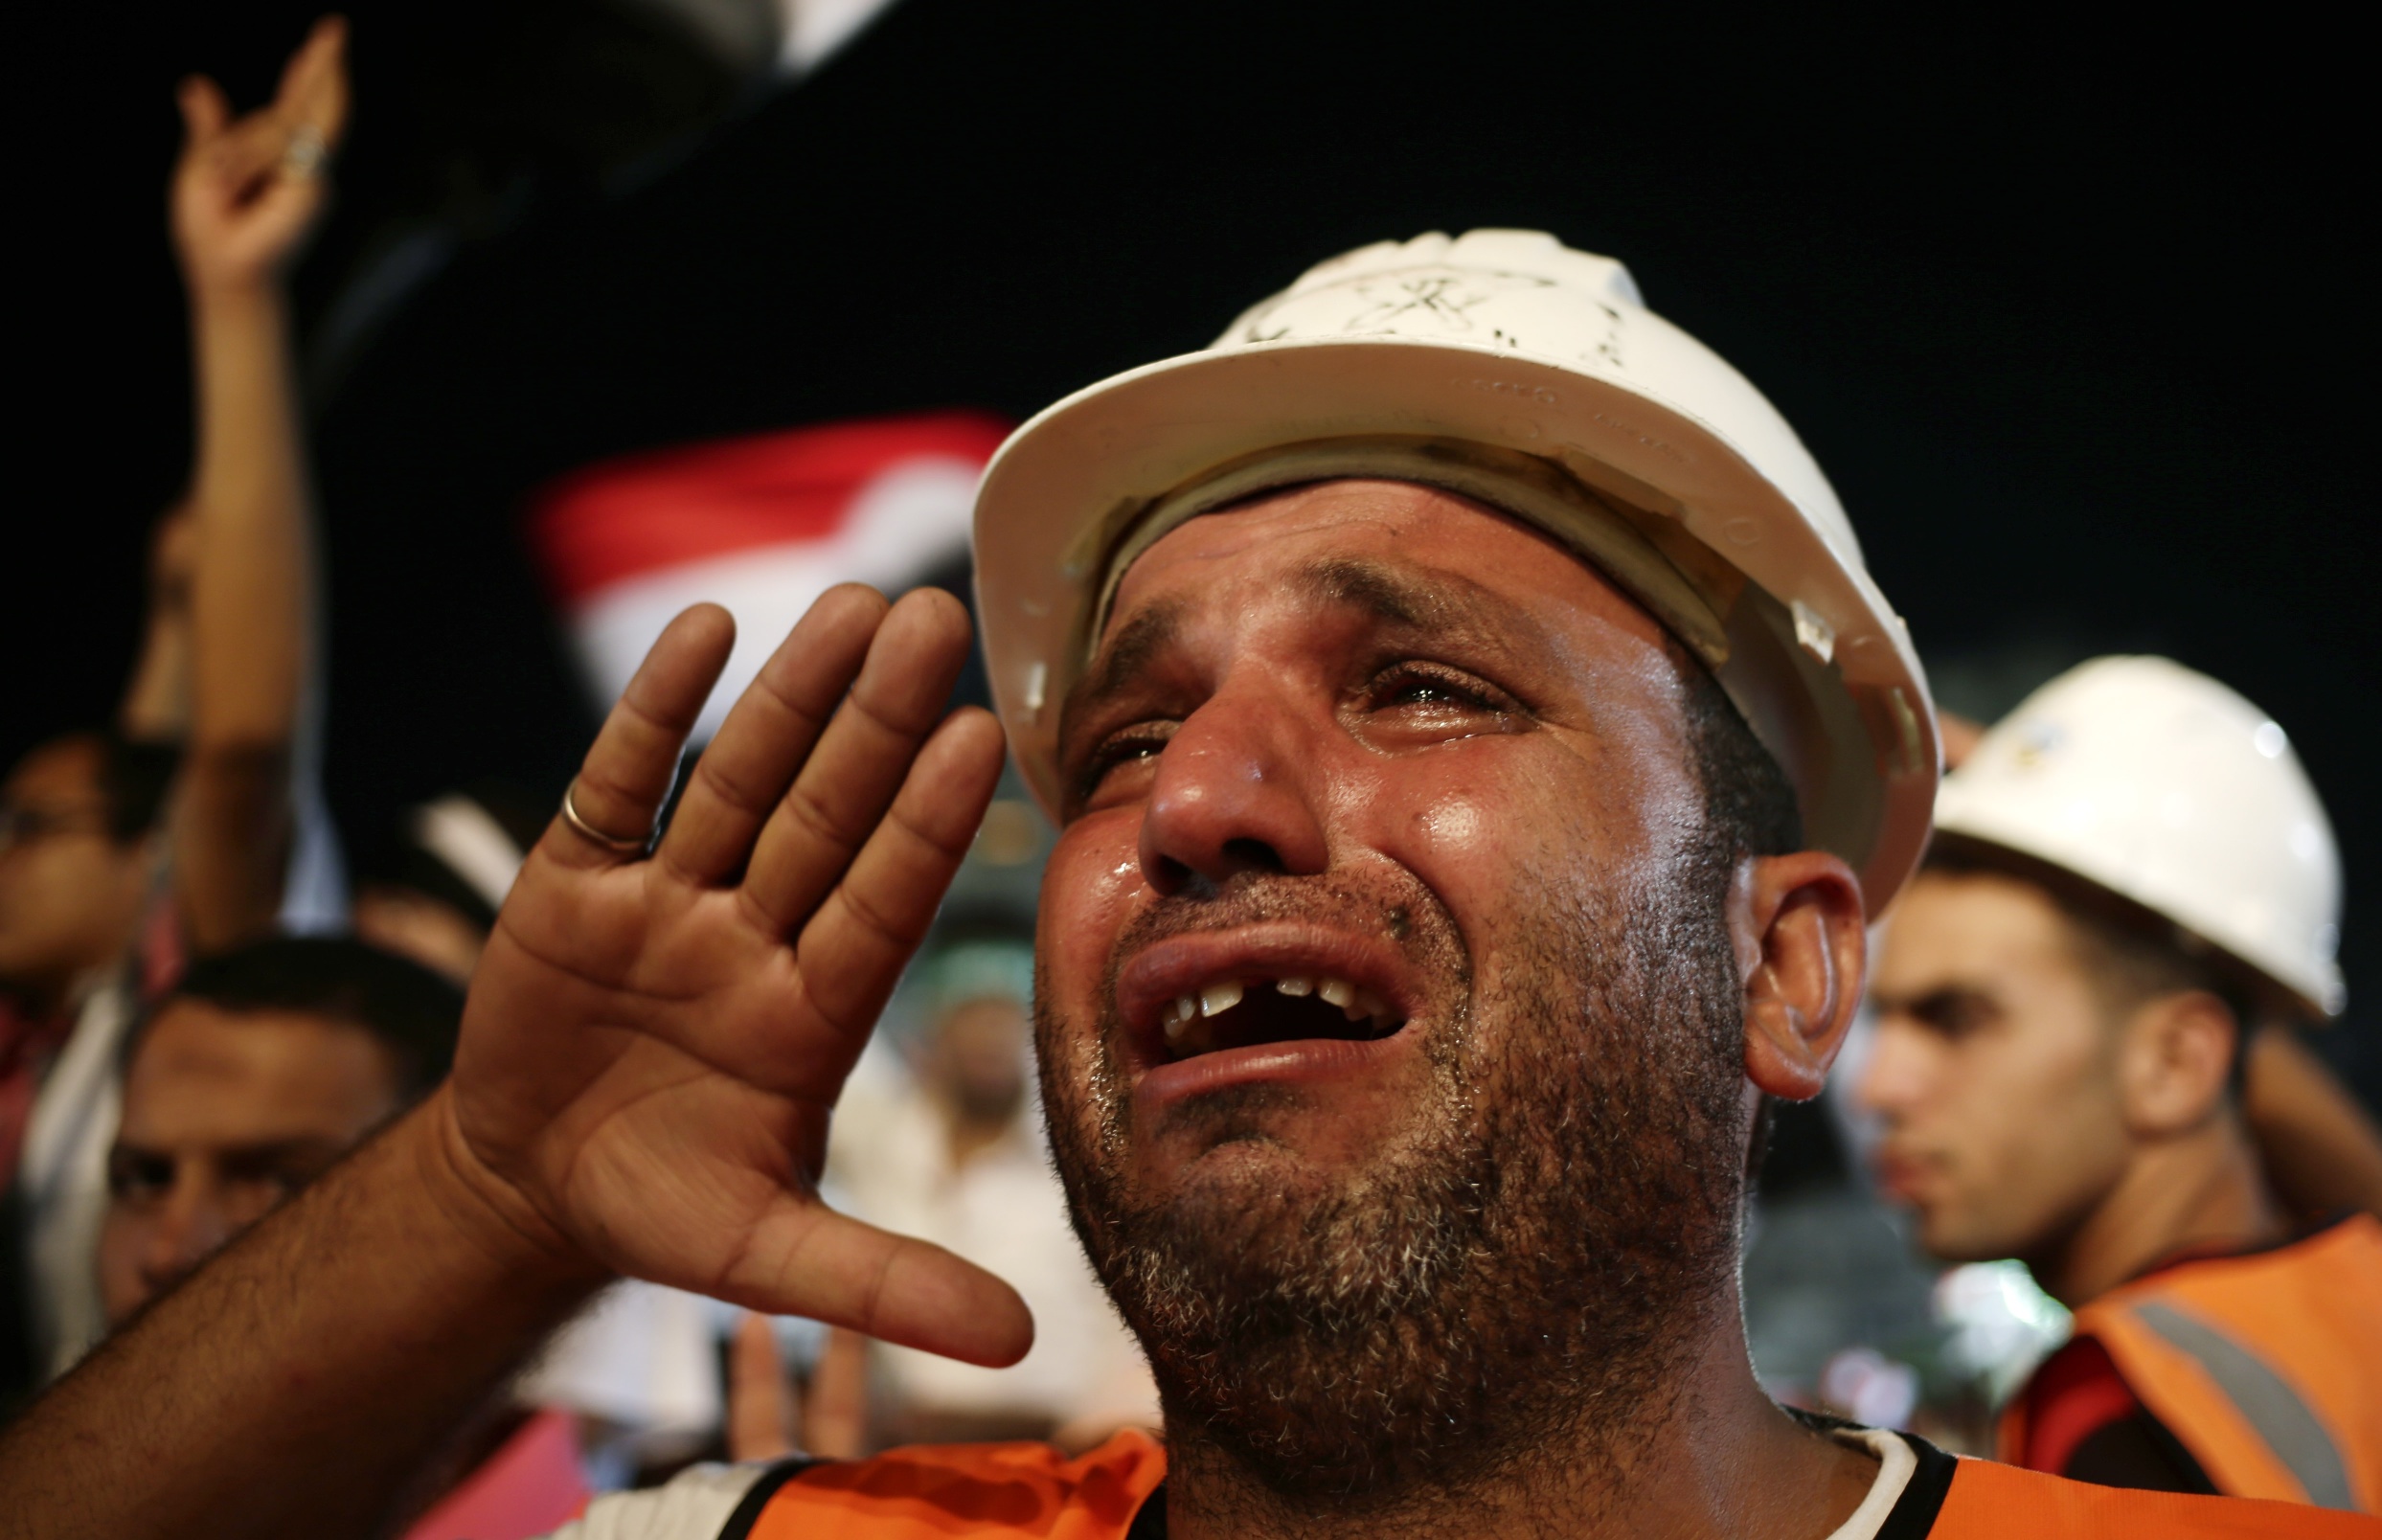 A supporter of Egypt's ousted President Mohammed Morsi cries while saluting the Egyptian flag at Rabaah al-Adawiya mosque, where supporters of Morsi hold daily rallies at Nasr City in Cairo. Photo: AP